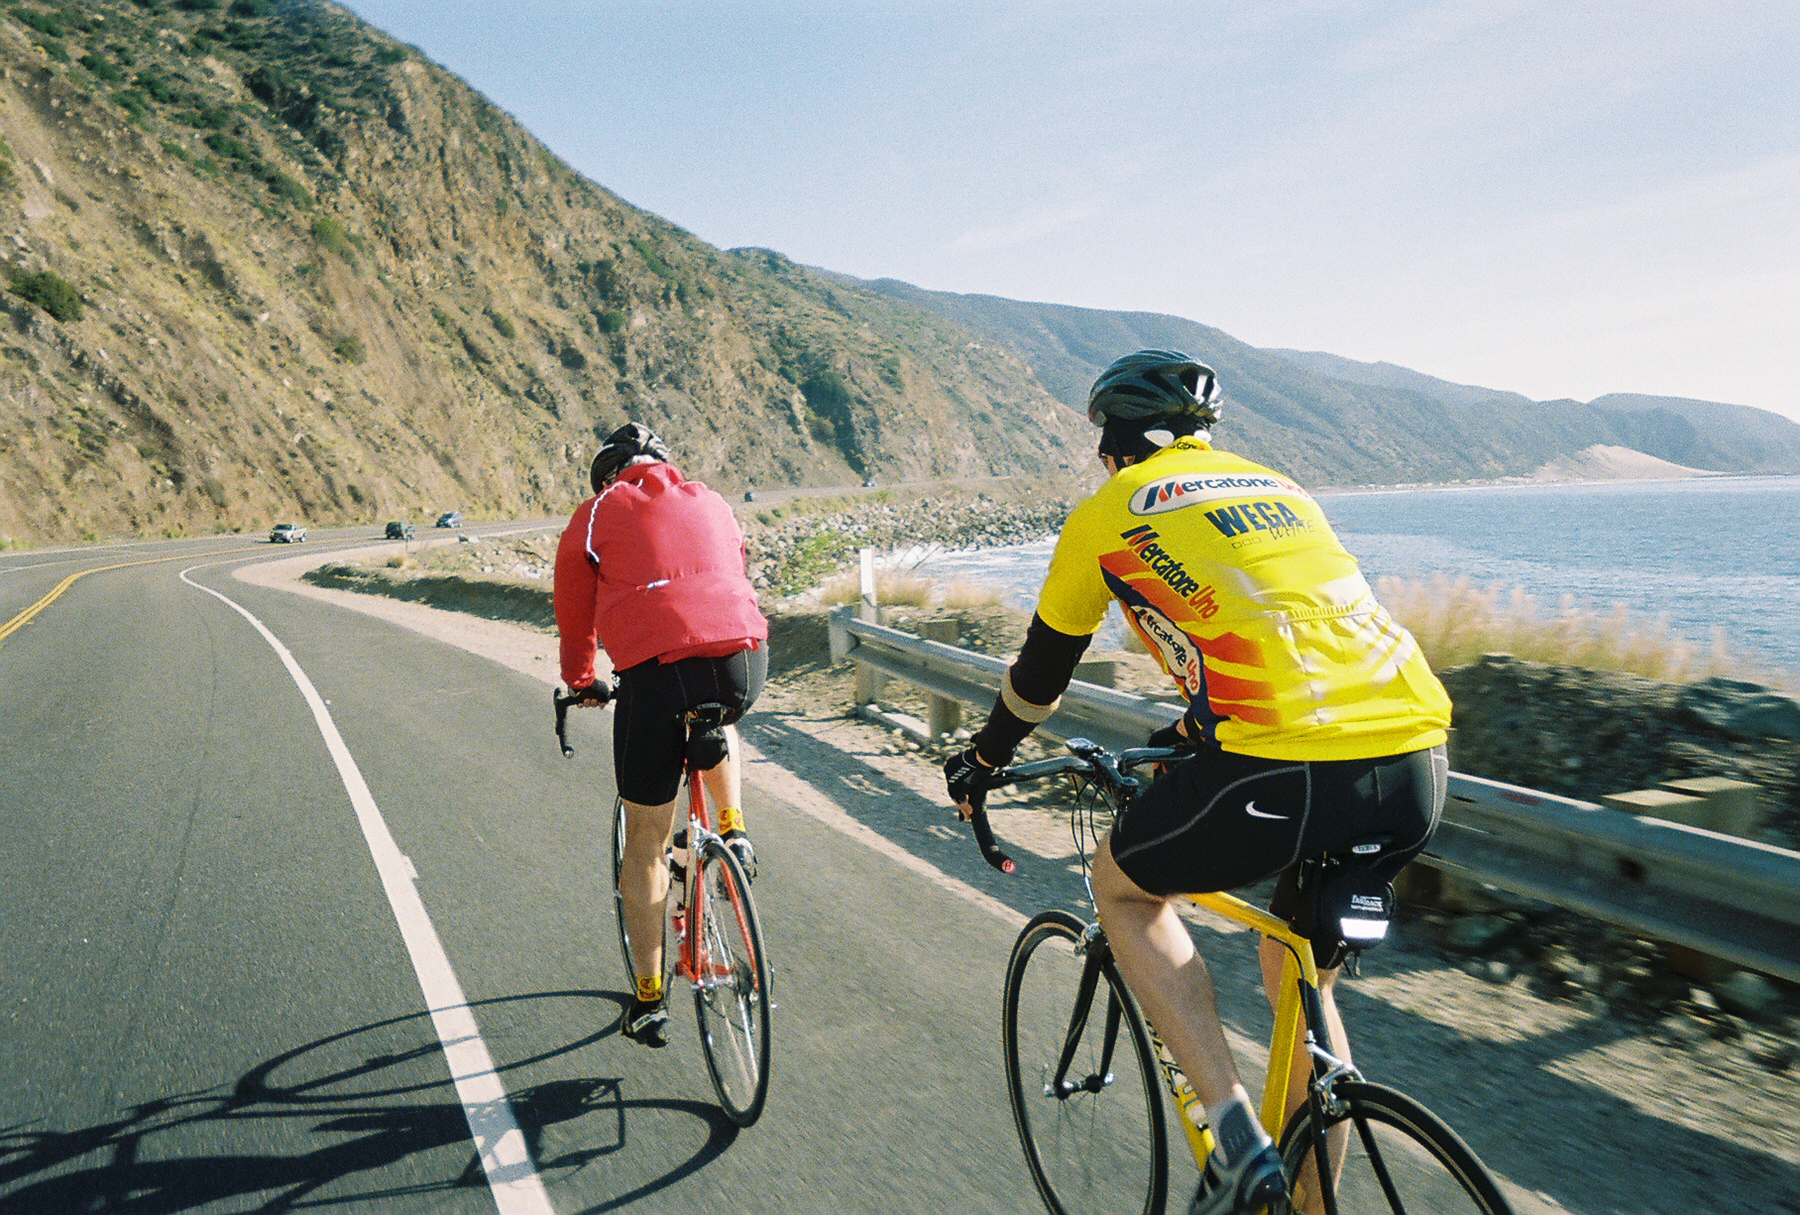 2006 SB Bike trip. Another pic of Dave and friend riding along the coast north of Santa Barbara.  Note: buddy has just about dropped off Dave's wheel.  That S-----a bike just can't keep up with a Strawberry.